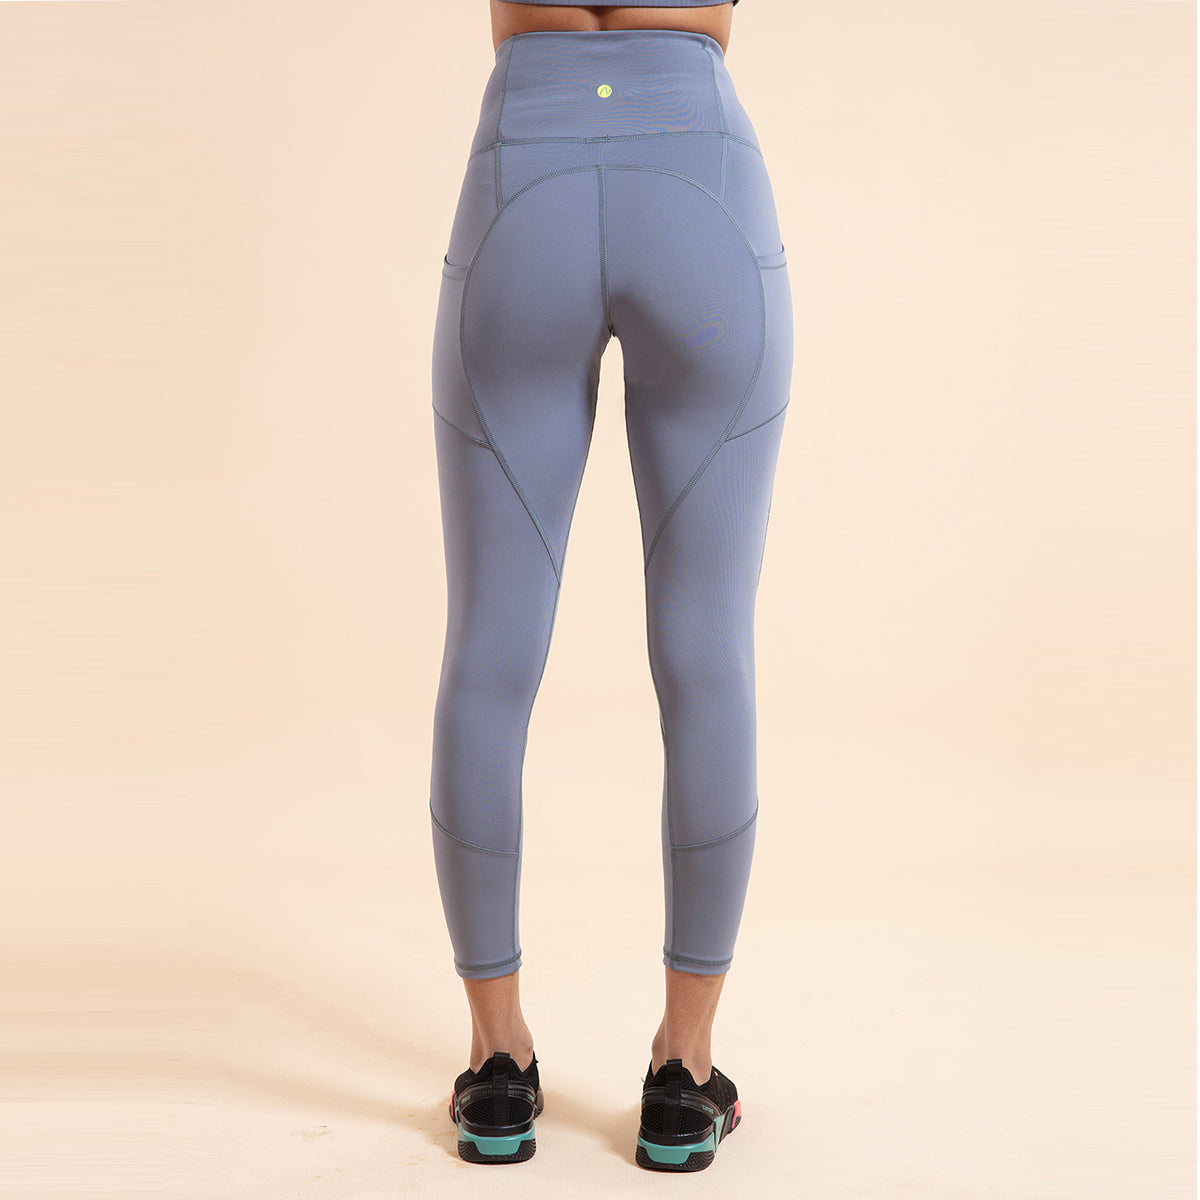 Nykd All Day High rise Classic Pannelled Leggings-NYK100 China Blue + Lime